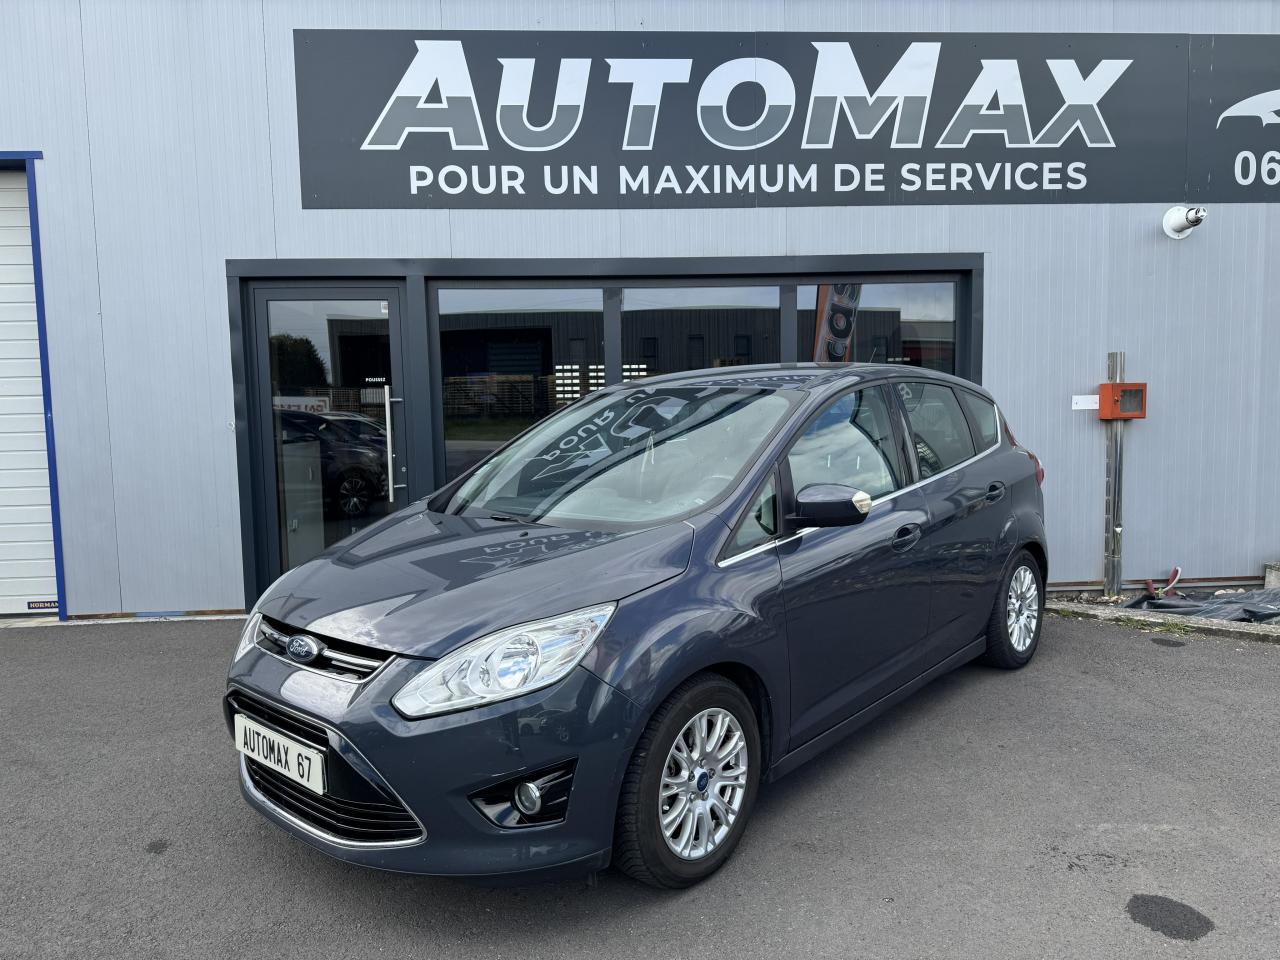 FORD-C MAX-C-MAX 1.6 16V Ti-VCT - 105  2010 Trend PHASE 1